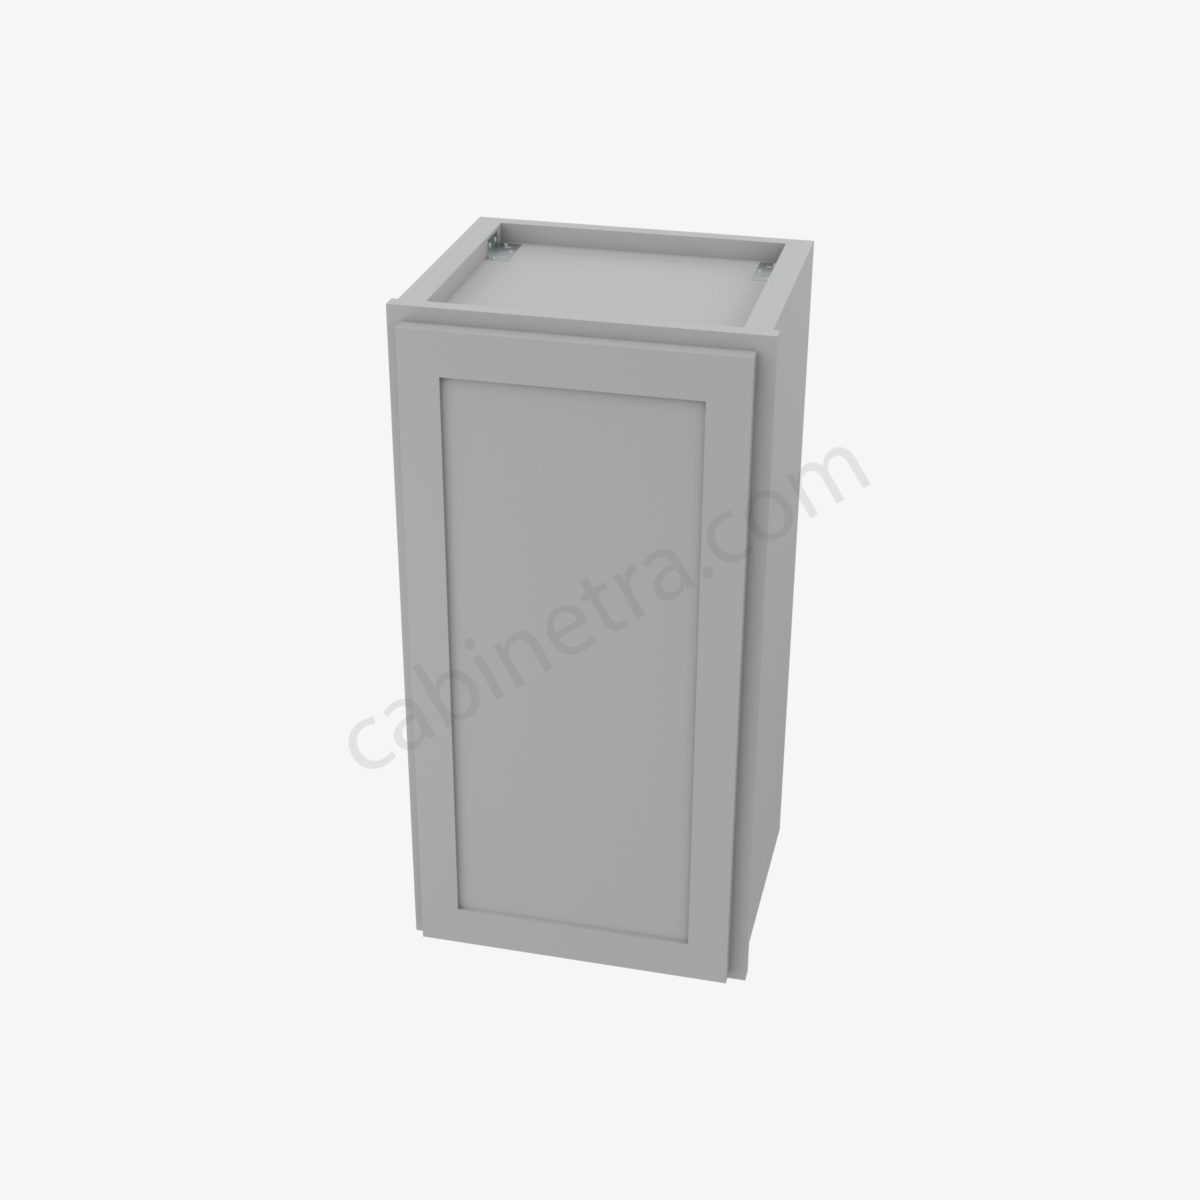 AB W1530 3 Forevermark Lait Gray Shaker Cabinetra scaled